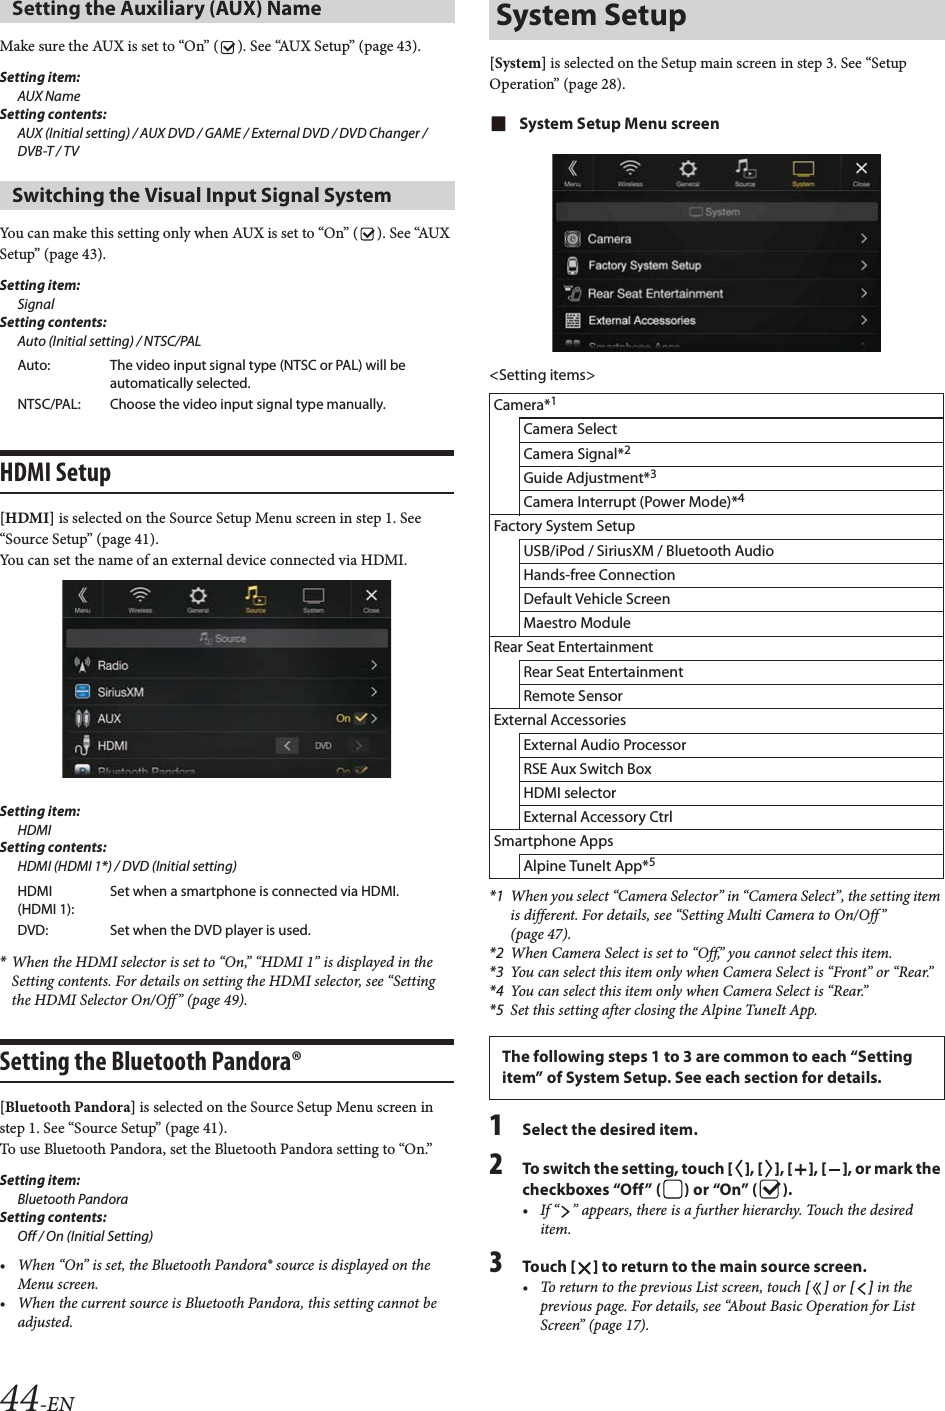 44-ENMake sure the AUX is set to “On” ( ). See “AUX Setup” (page 43).Setting item:AUX NameSetting contents:AUX (Initial setting) / AUX DVD / GAME / External DVD / DVD Changer / DVB-T / TV You can make this setting only when AUX is set to “On” ( ). See “AUX Setup” (page 43).Setting item:SignalSetting contents:Auto (Initial setting) / NTSC/PALHDMI Setup[HDMI] is selected on the Source Setup Menu screen in step 1. See “Source Setup” (page 41).You can set the name of an external device connected via HDMI.Setting item:HDMISetting contents:HDMI (HDMI 1*) / DVD (Initial setting)*When the HDMI selector is set to “On,” “HDMI 1” is displayed in the Setting contents. For details on setting the HDMI selector, see “Setting the HDMI Selector On/Off” (page 49).Setting the Bluetooth Pandora®[Bluetooth Pandora] is selected on the Source Setup Menu screen in step 1. See “Source Setup” (page 41).To use Bluetooth Pandora, set the Bluetooth Pandora setting to “On.”Setting item: Bluetooth PandoraSetting contents: Off / On (Initial Setting)• When “On” is set, the Bluetooth Pandora® source is displayed on the Menu screen.• When the current source is Bluetooth Pandora, this setting cannot be adjusted.[System] is selected on the Setup main screen in step 3. See “Setup Operation” (page 28).System Setup Menu screen&lt;Setting items&gt;*1 When you select “Camera Selector” in “Camera Select”, the setting item is different. For details, see “Setting Multi Camera to On/Off ” (page 47).*2 When Camera Select is set to “Off,” you cannot select this item.*3 You can select this item only when Camera Select is “Front” or “Rear.”*4 You can select this item only when Camera Select is “Rear.”*5 Set this setting after closing the Alpine TuneIt App.1Select the desired item.2To switch the setting, touch [], [], [], [], or mark the checkboxes “Off” ( ) or “On” ( ).• If “ ” appears, there is a further hierarchy. Touch the desired item.3Tou ch [] to return to the main source screen.• To return to the previous List screen, touch [] or [] in the previous page. For details, see “About Basic Operation for List Screen” (page 17).Setting the Auxiliary (AUX) Name Switching the Visual Input Signal SystemAuto: The video input signal type (NTSC or PAL) will be automatically selected.NTSC/PAL: Choose the video input signal type manually.HDMI (HDMI 1):Set when a smartphone is connected via HDMI.DVD: Set when the DVD player is used.System SetupCamera*1Camera SelectCamera Signal*2Guide Adjustment*3Camera Interrupt (Power Mode)*4Factory System SetupUSB/iPod / SiriusXM / Bluetooth AudioHands-free ConnectionDefault Vehicle ScreenMaestro ModuleRear Seat EntertainmentRear Seat EntertainmentRemote SensorExternal AccessoriesExternal Audio ProcessorRSE Aux Switch BoxHDMI selectorExternal Accessory CtrlSmartphone AppsAlpine TuneIt App*5The following steps 1 to 3 are common to each “Setting item” of System Setup. See each section for details.